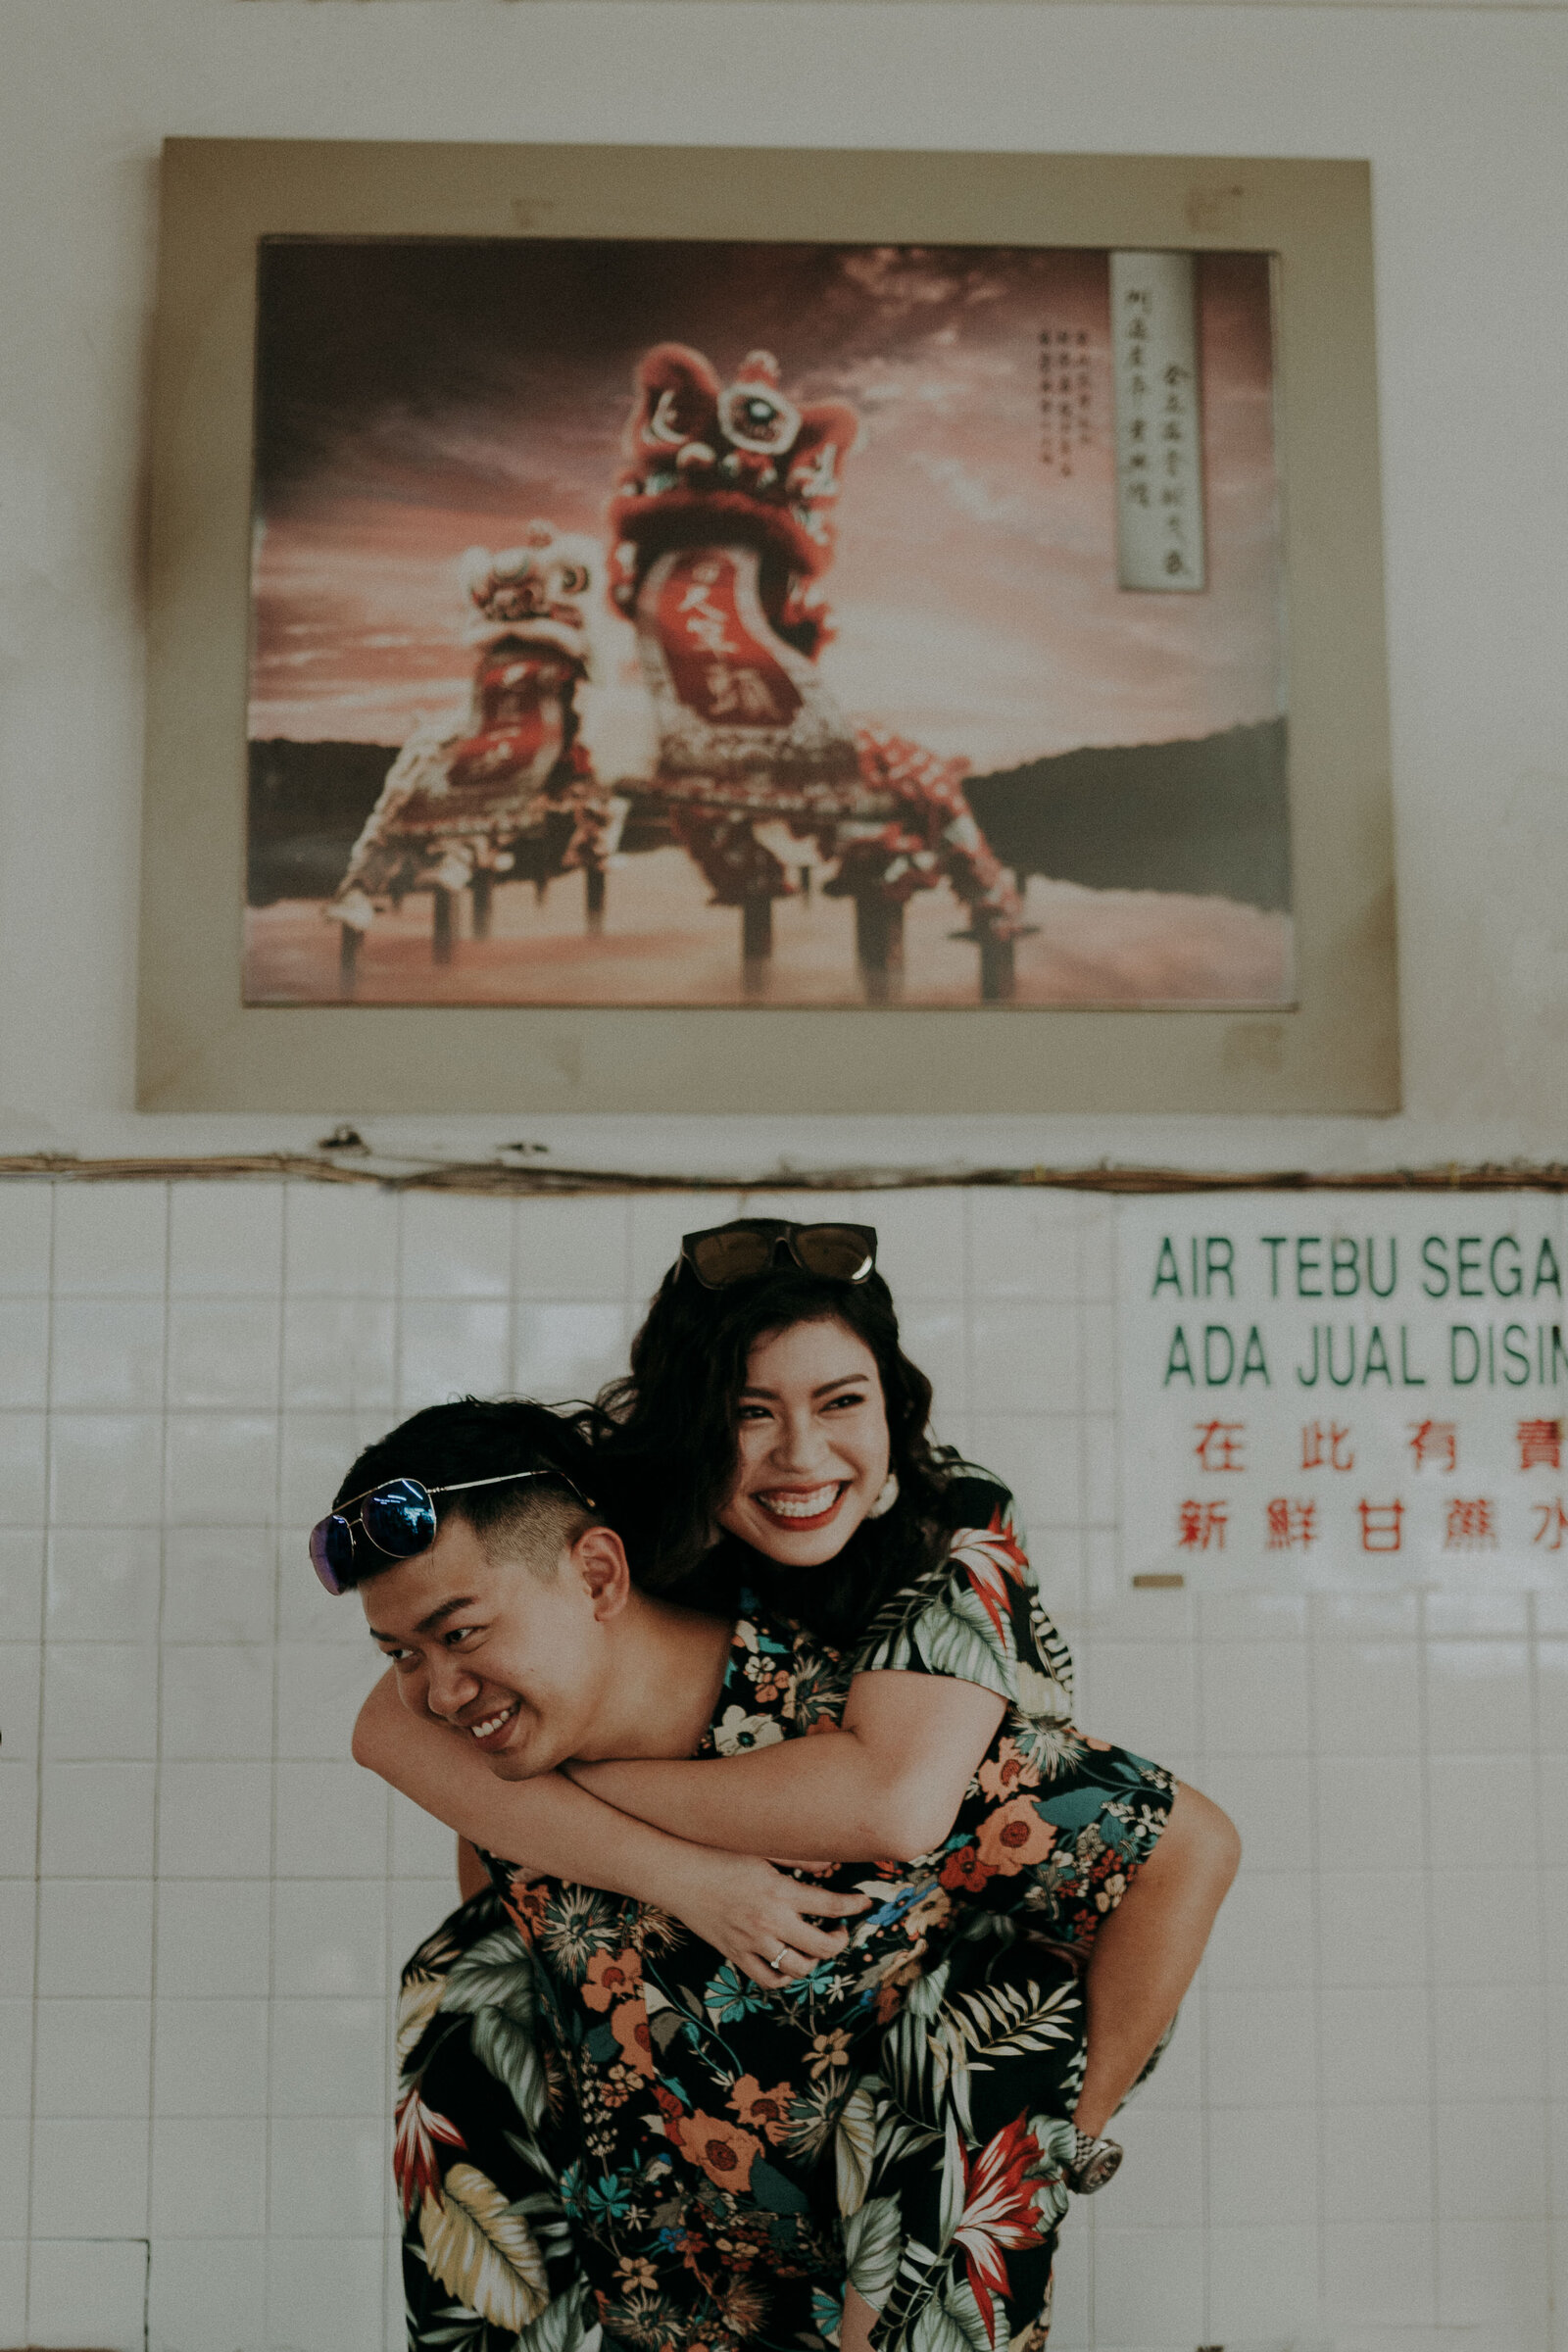 the groom carry the bride on back with a lion dance painting behind them